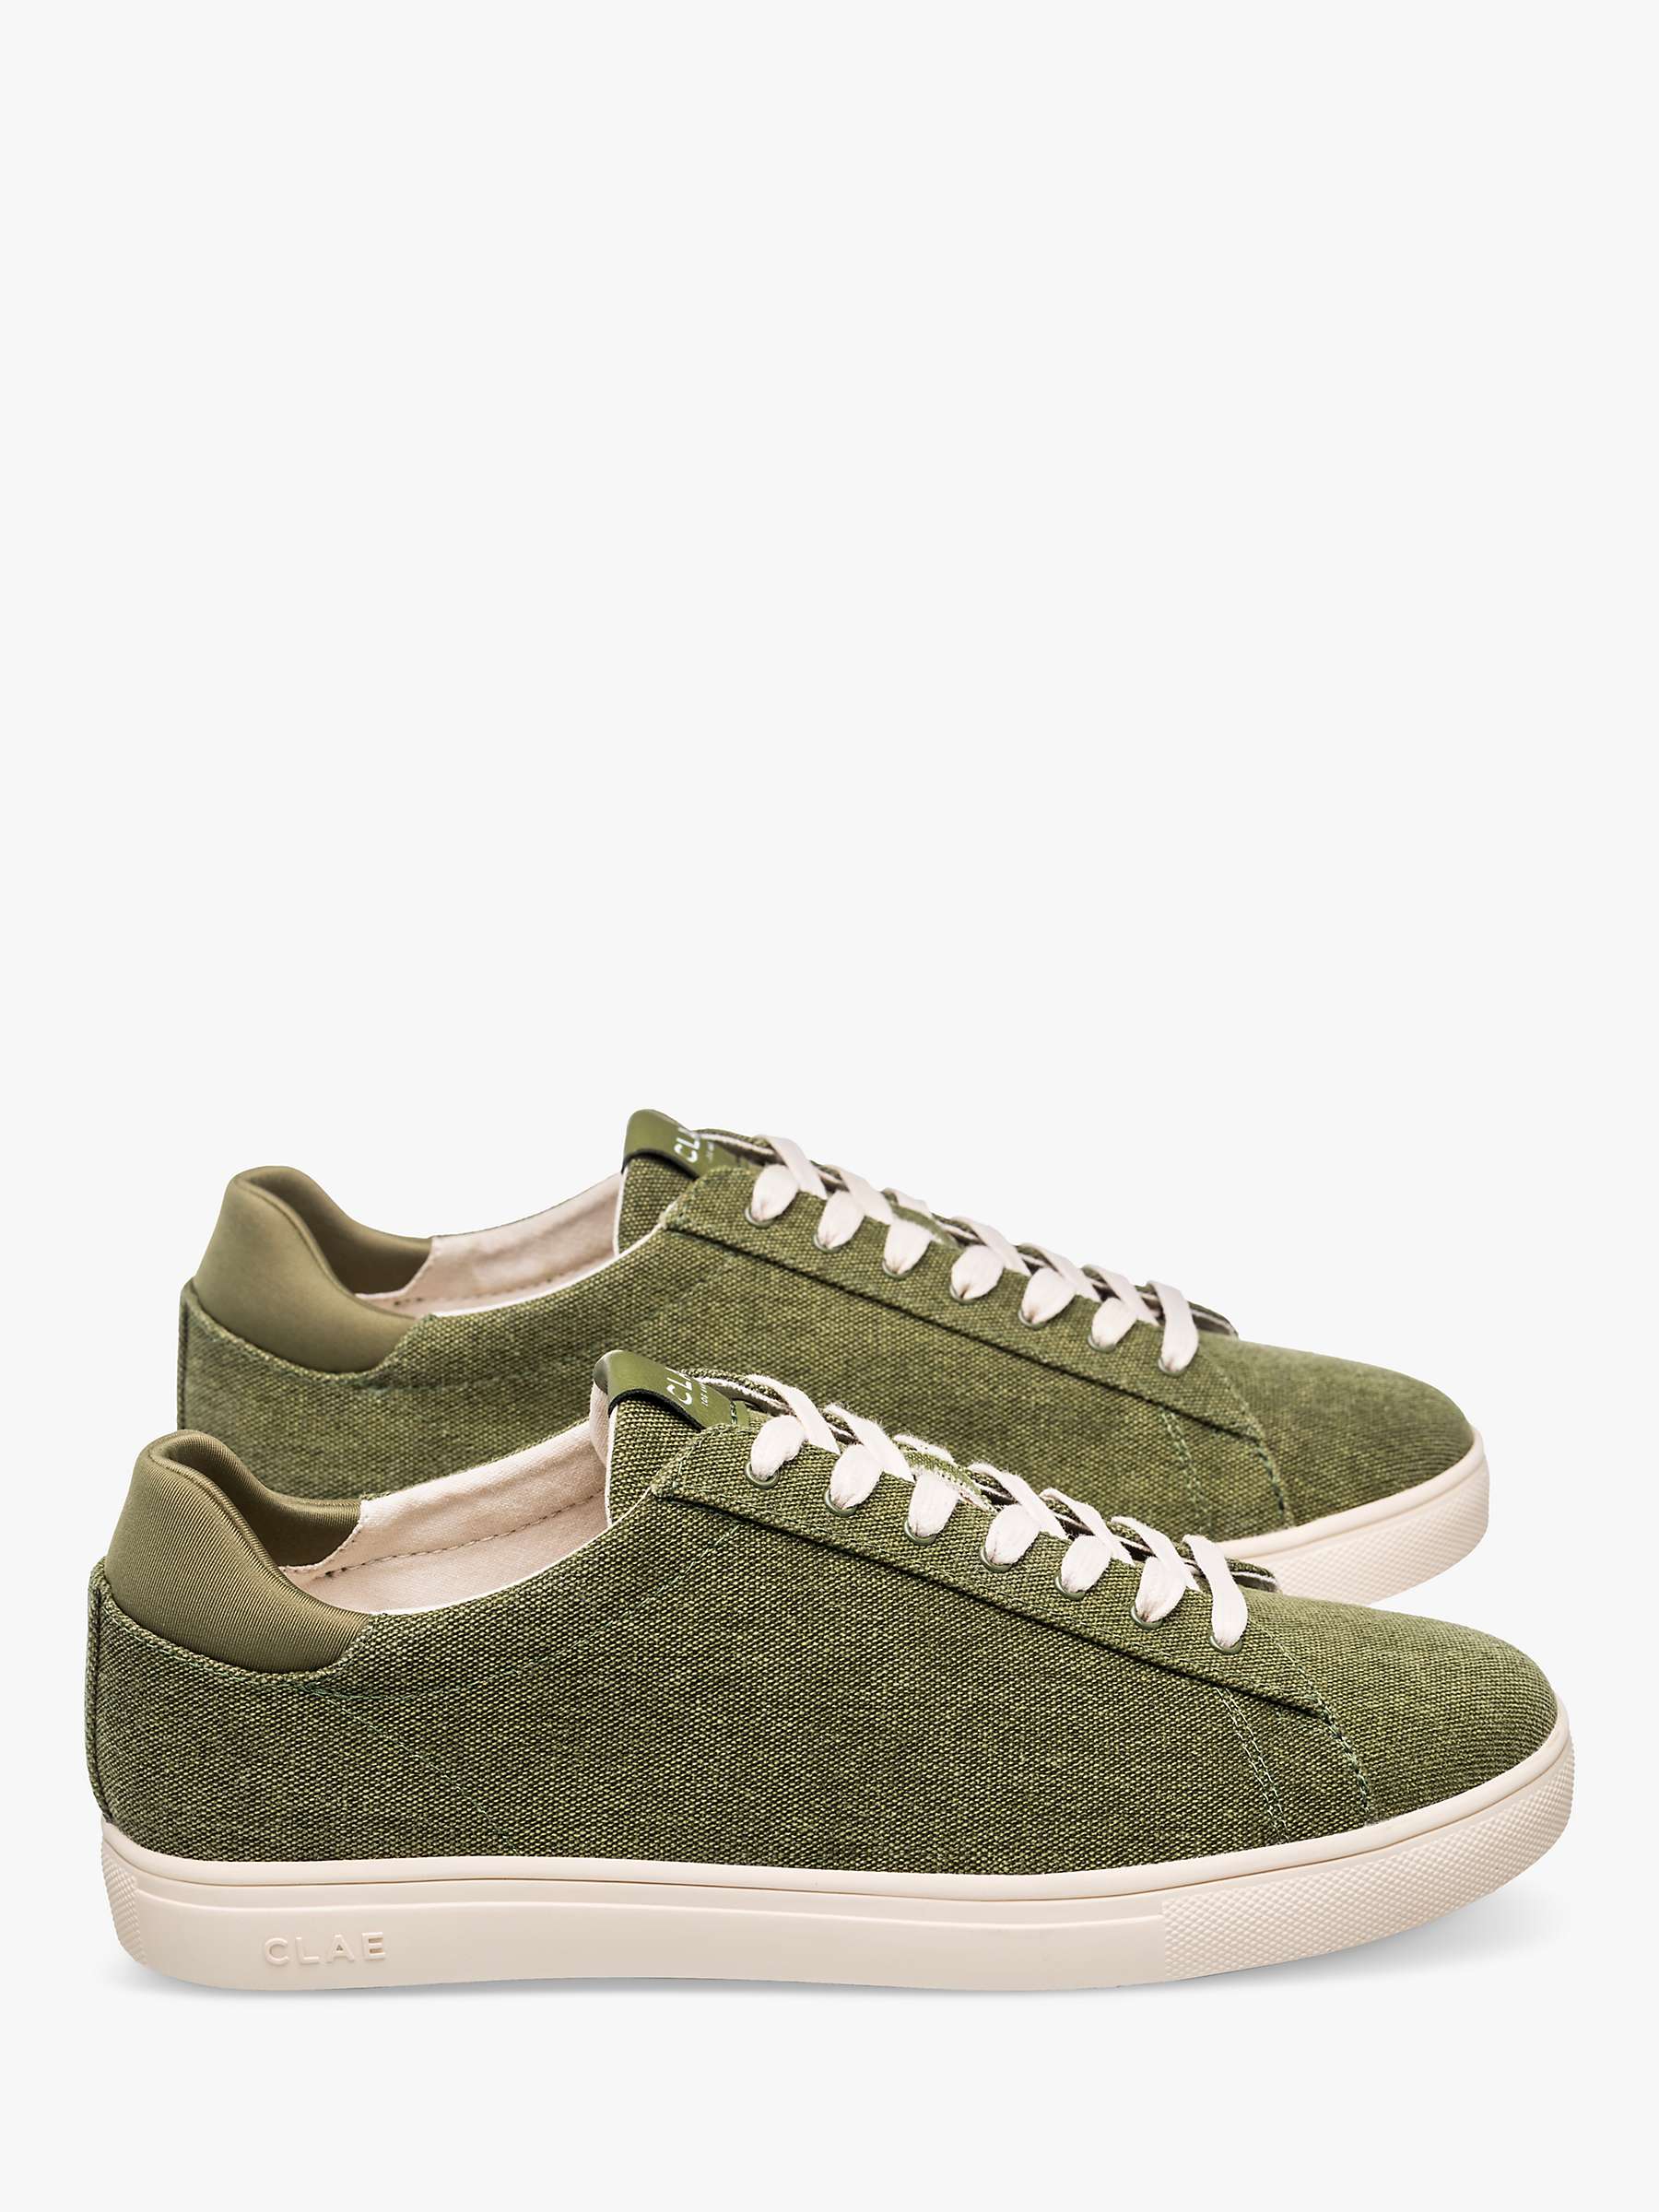 Buy CLAE Bradley Textile Lace Up Trainers, Olive Wash Online at johnlewis.com